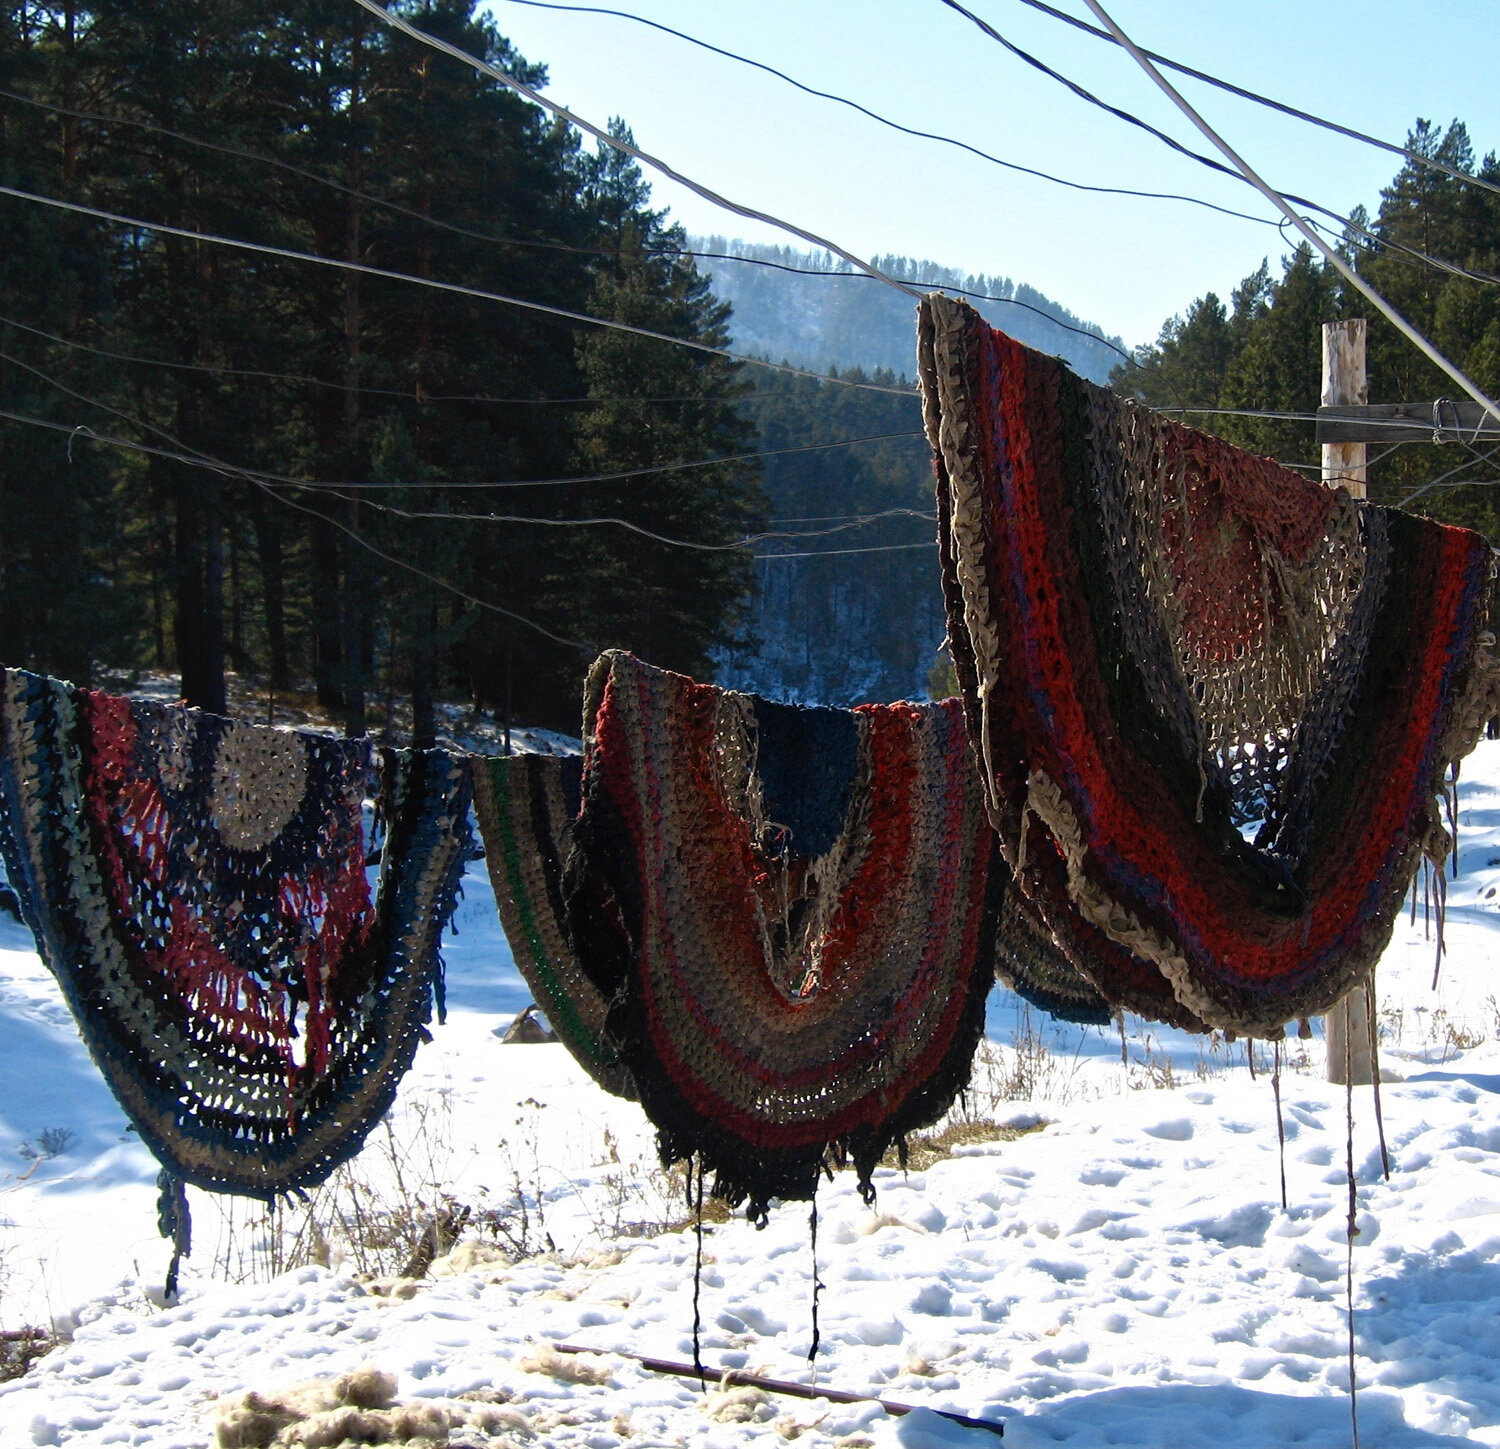 drying in the sun altay mountains 2.jpg